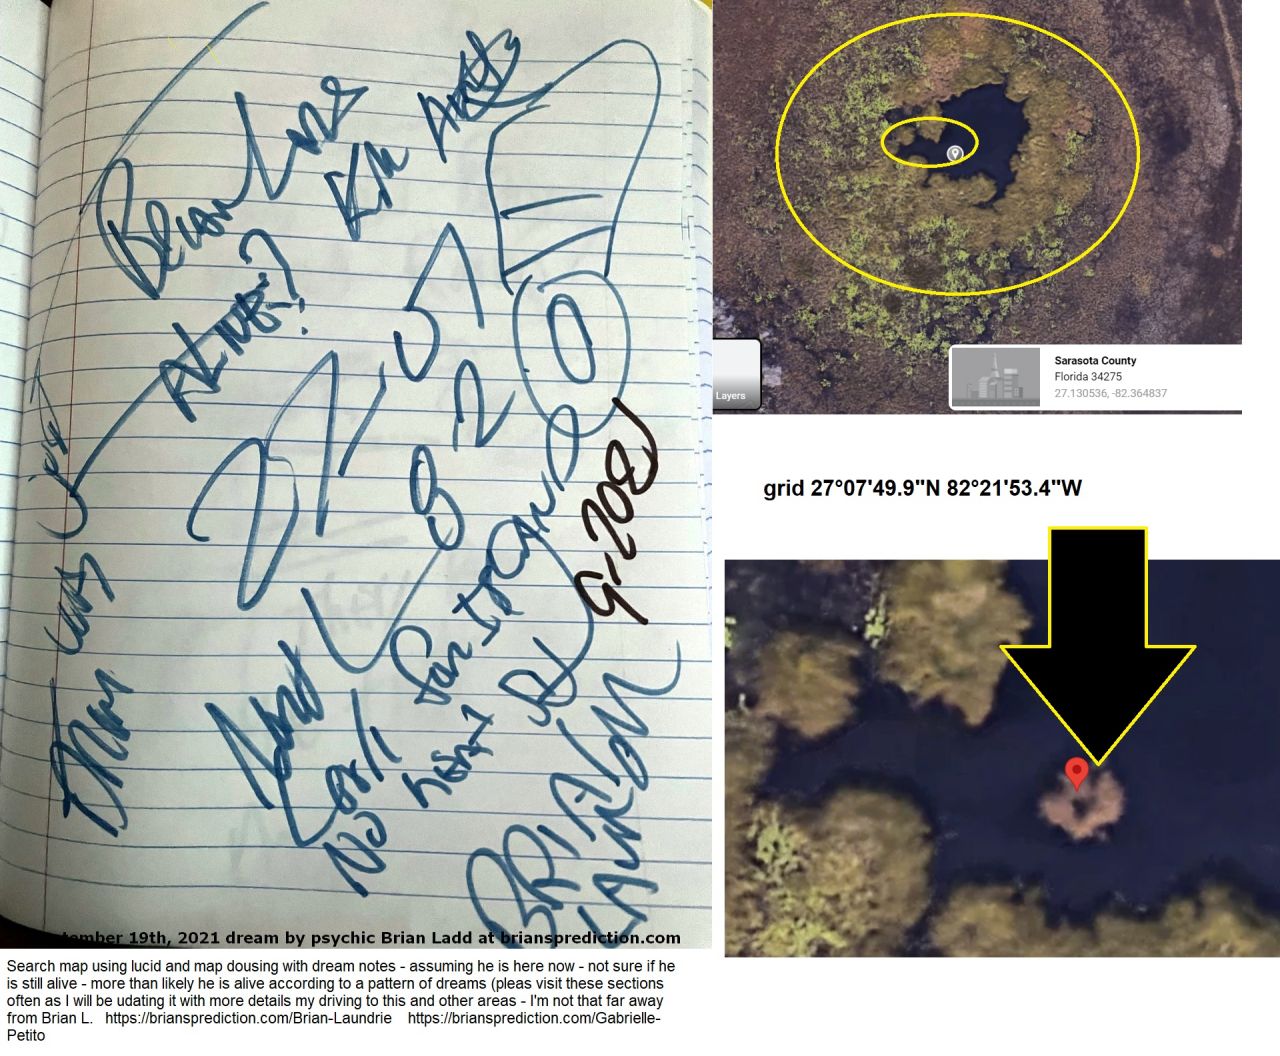 Brian Laundrie is going to kill himself?  no  body found 8 days - water island - no heat signature - mud - drone was just there
Brian Laundrie is going to kill himself?  no  body found 8 days - water island - no heat signature - mud - drone was just there (no idea but it does not follow past dream readings)
 grid 27°07'49.9"N 82°21'53.4"W


Brian Laundrie search map using lucid and map dousing with dream notes - assuming he is here now - not sure if he is still alive - more than likely he is alive according to a pattern of dreams (pleas visit these sections often as I will be updating it with more details my driving to this and other areas - I'm not that far away from Brian L.

 https://briansprediction.com/Brian-Laundrie
 https://briansprediction.com/Gabrielle-Petito 
Brian Laundrie is going to kill himself?  no  body found 8 days - water island - no heat signature - mud - drone was just there (no idea but it does not follow past dream readings)
 grid 27°07'49.9"N 82°21'53.4"W


Brian Laundrie search map using lucid and map dousing with dream notes - assuming he is here now - not sure if he is still alive - more than likely he is alive according to a pattern of dreams (pleas visit these sections often as I will be updating it with more details my driving to this and other areas - I'm not that far away from Brian L.

 https://briansprediction.com/Brian-Laundrie
 https://briansprediction.com/Gabrielle-Petito 
This is the link to my private search operation please do not share this link.   https://briansprediction.com/thumbnails.php?album=17669   This link will not work for the general public and should be hidden from no logged in users and search engines.  I will personally be involved in the Flordia search starting October 1st, 2021 - updates will ONLY be posted in this private area.
